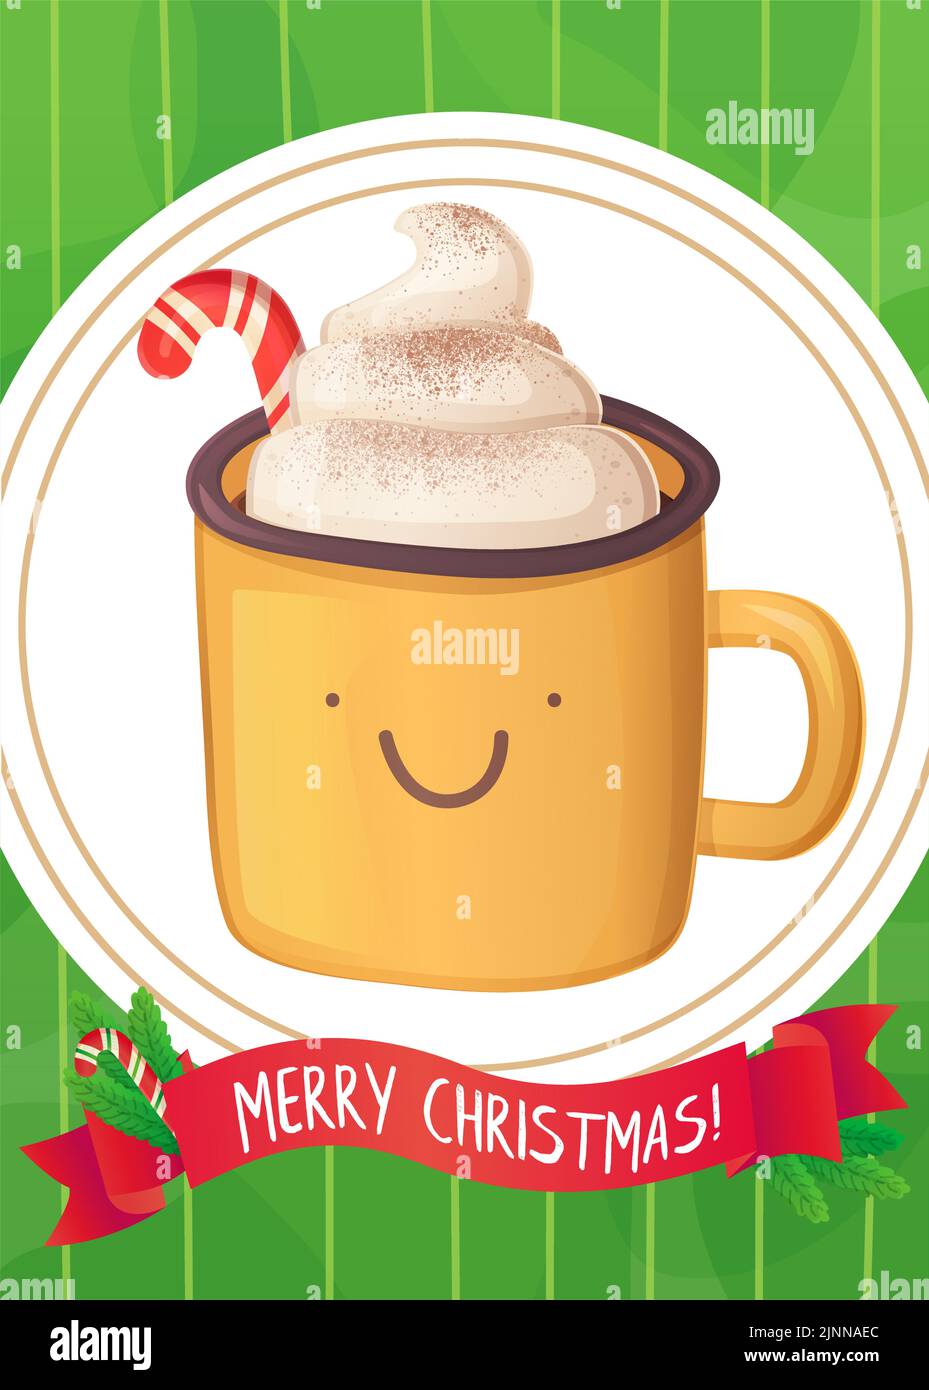 Cute hot chocolate with whipped cream and candy cane christmas greeting card. Stock Vector